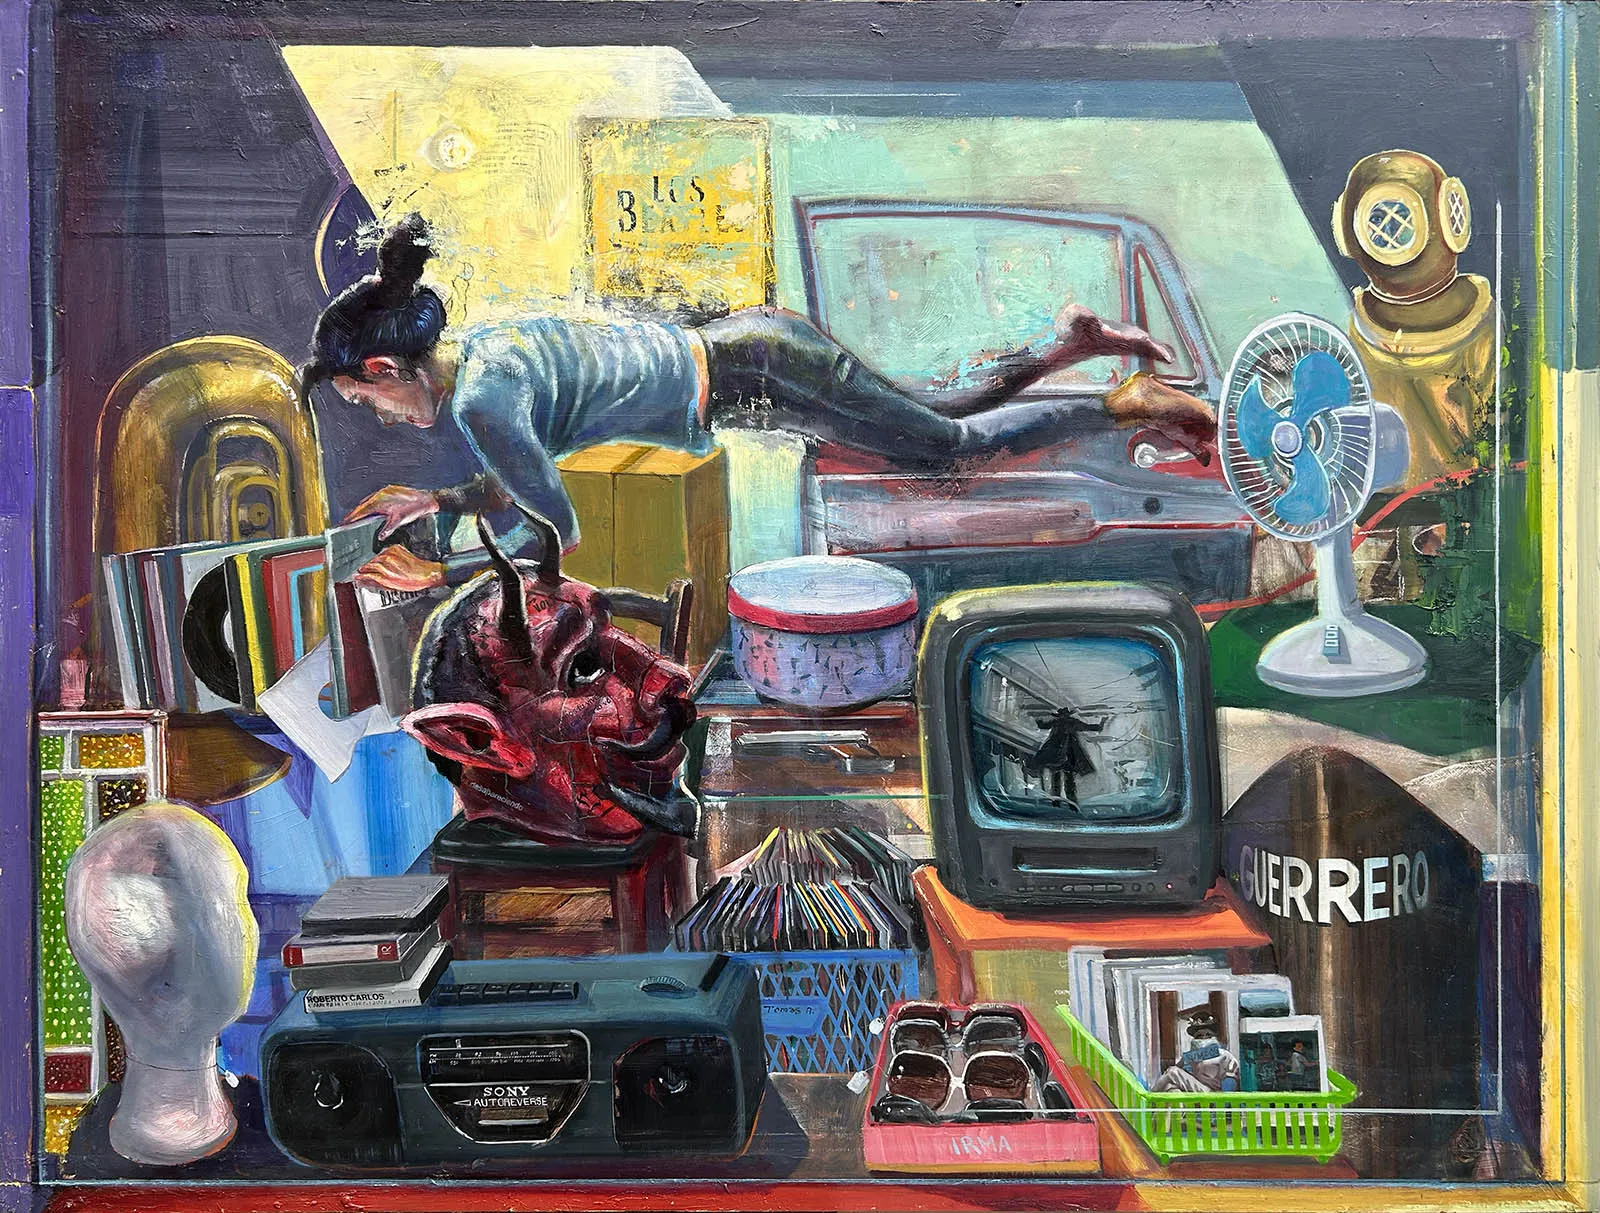 A painted image that shows a person wearing jeans and a long sleeved T-shirt floating in a room full of objects. The floating person touches a stack of records.